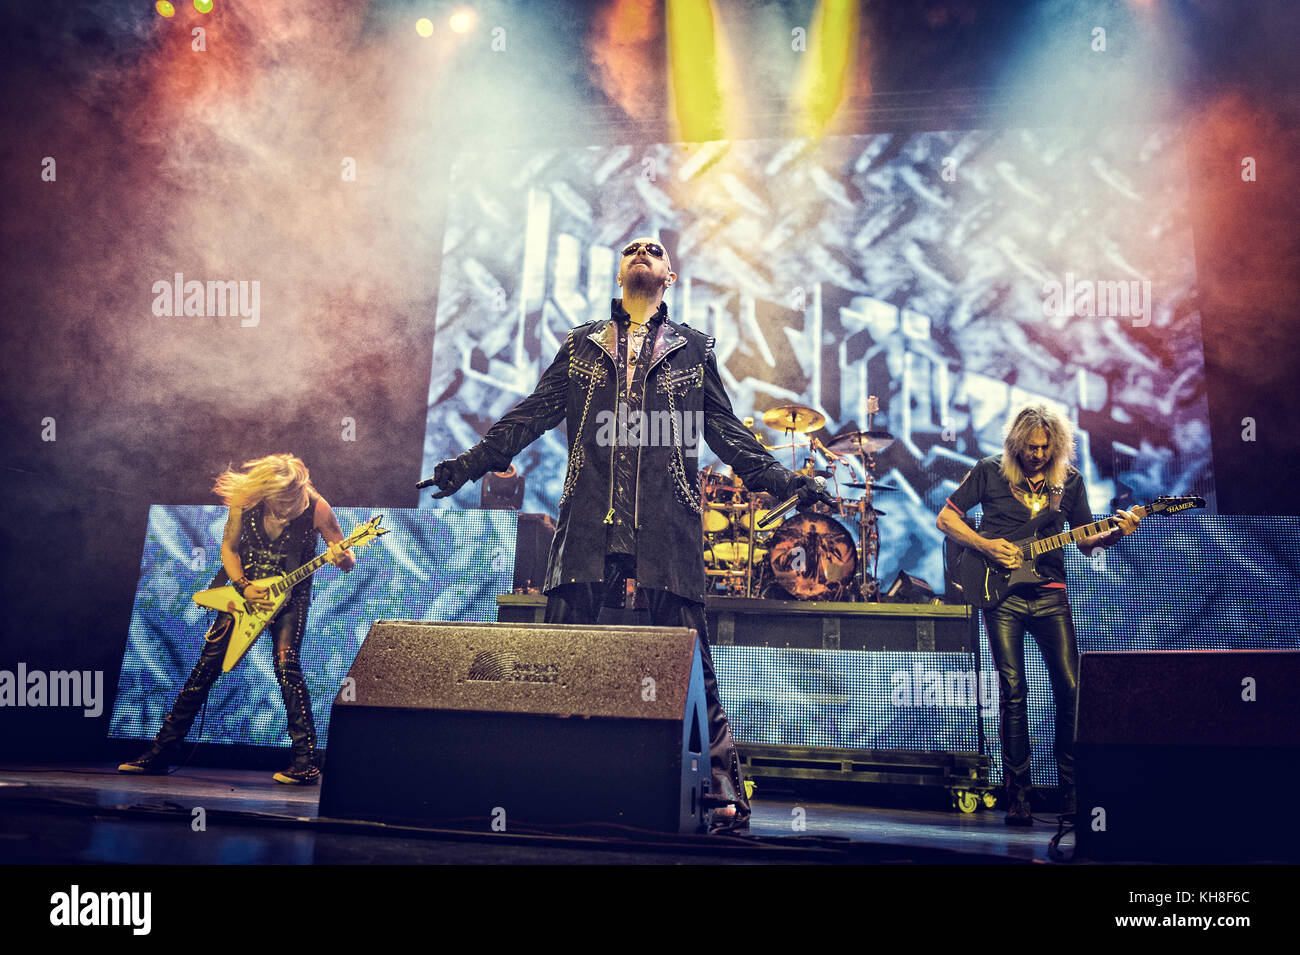 The English heavy metal band Judas Priest performs a live concert at Spektrum in Oslo. Here vocalist and songwriter Rob Halford (C) is pictured live on stage with the guitarists Richie Faulkner (L) and Glenn Tipton (R). Norway, 02/06 2015. Stock Photo